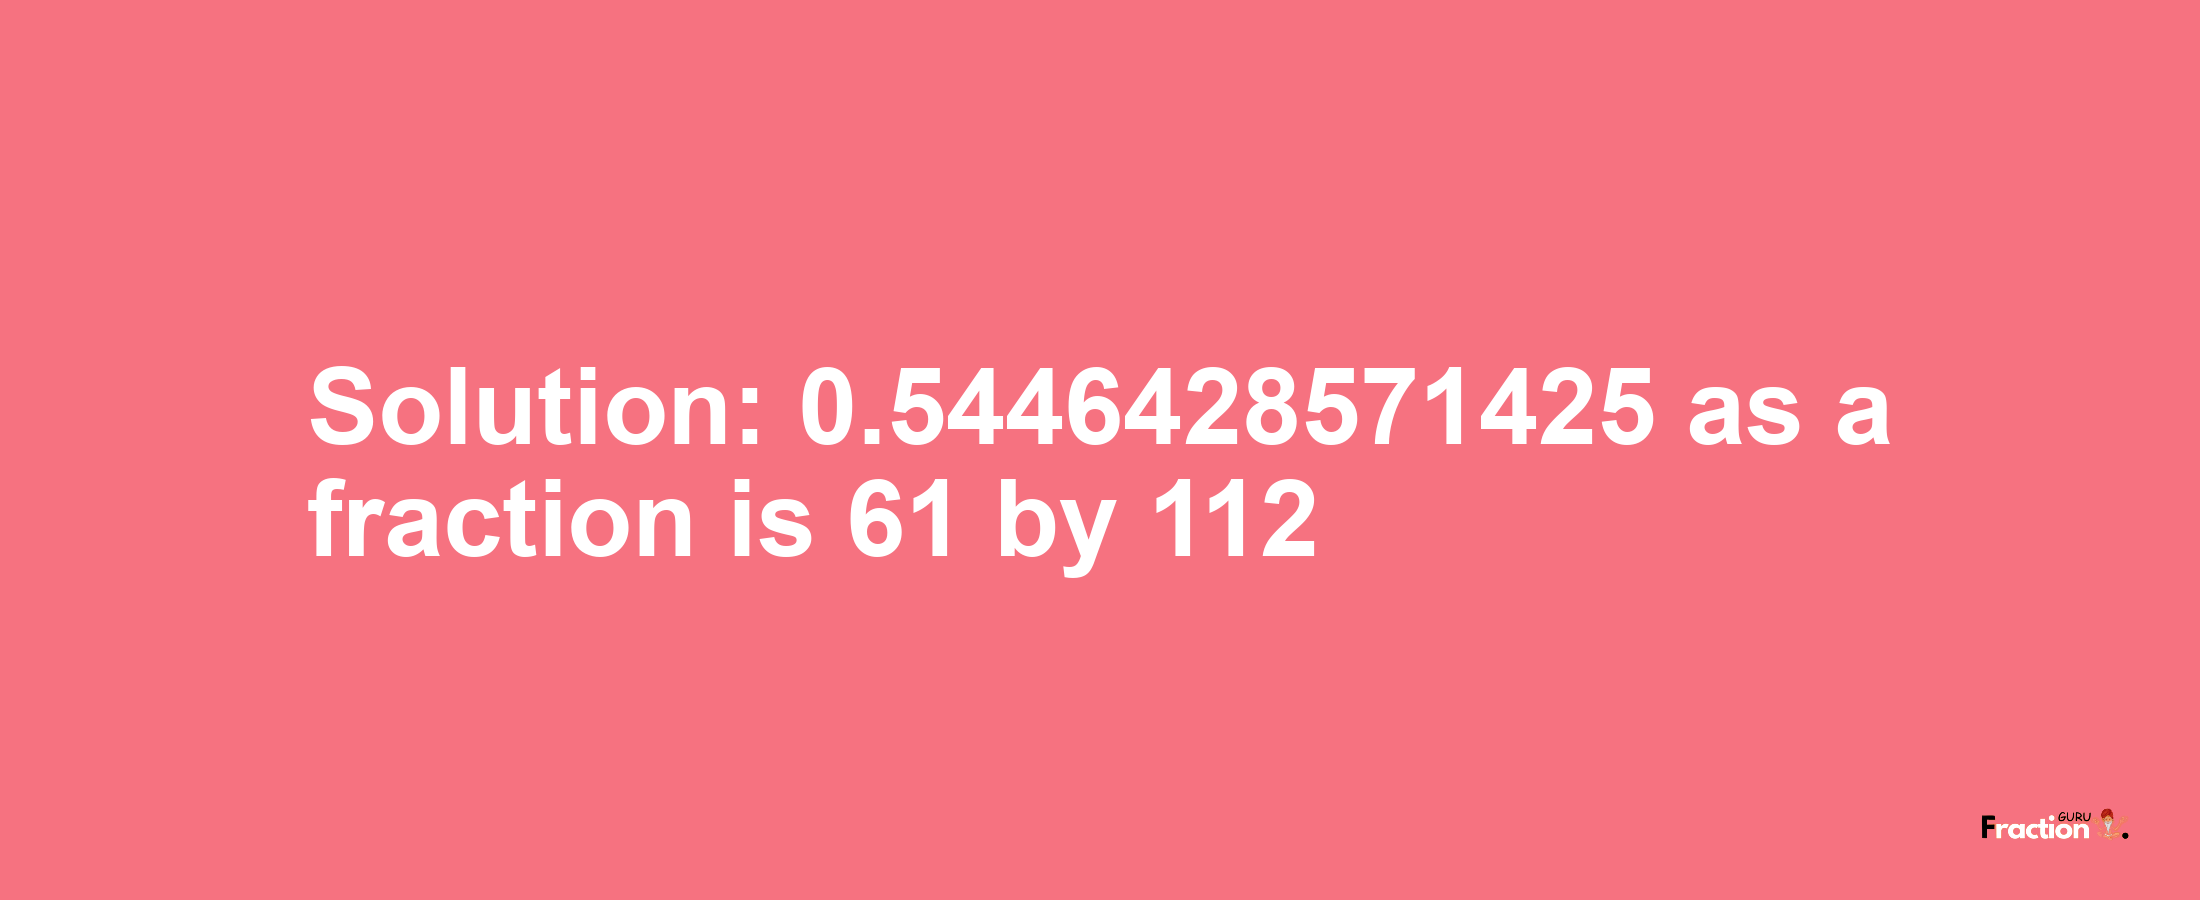 Solution:0.5446428571425 as a fraction is 61/112